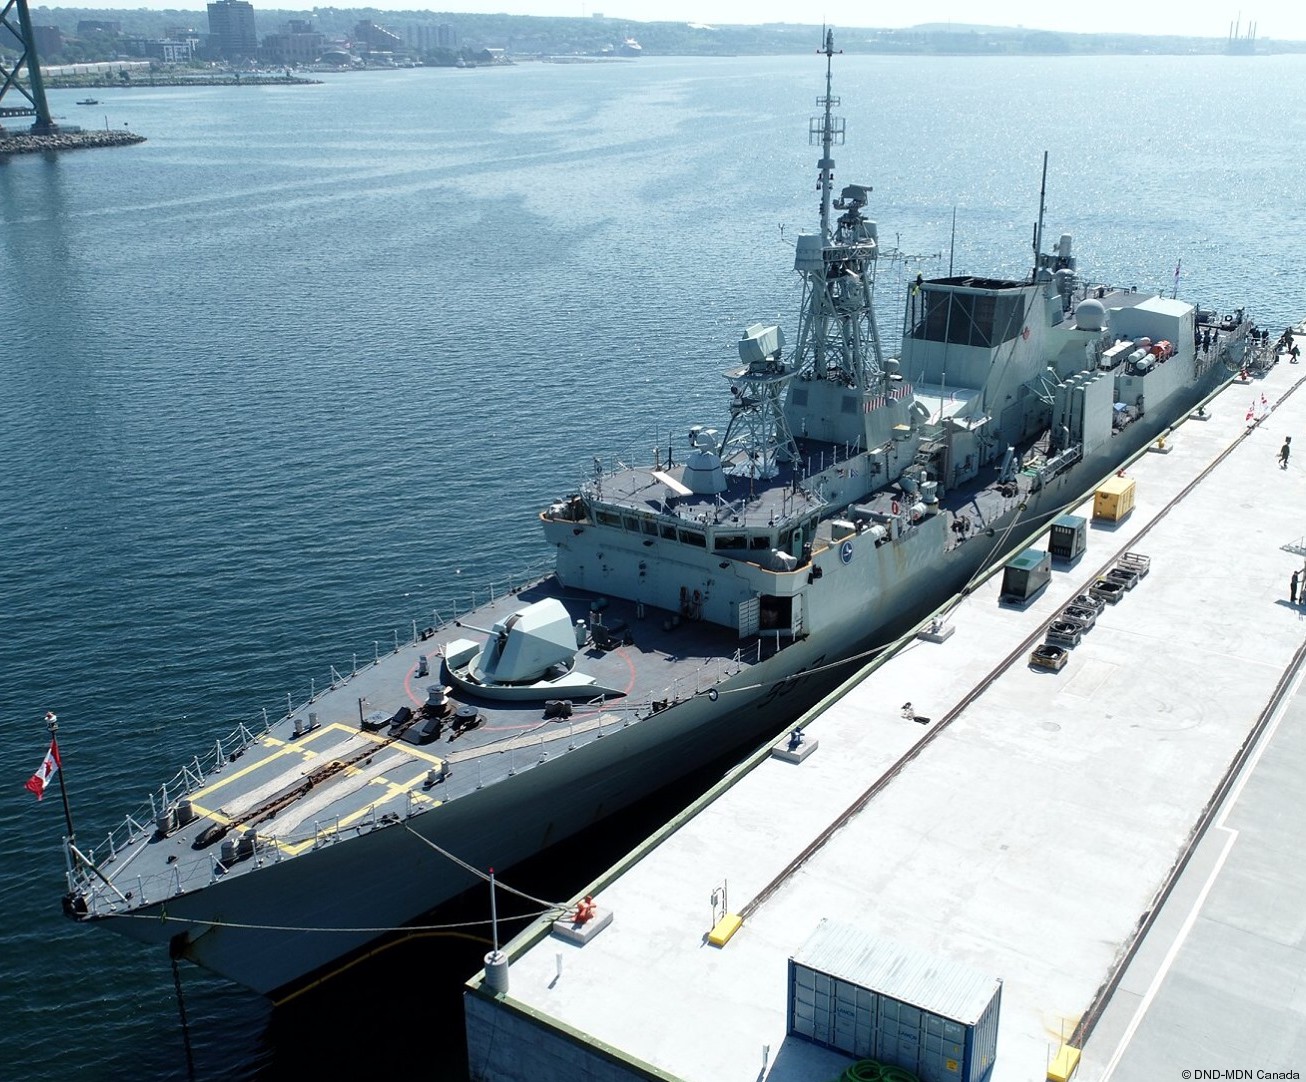 ffh-337 hmcs fredericton halifax class helicopter patrol frigate ncsm royal canadian navy 15